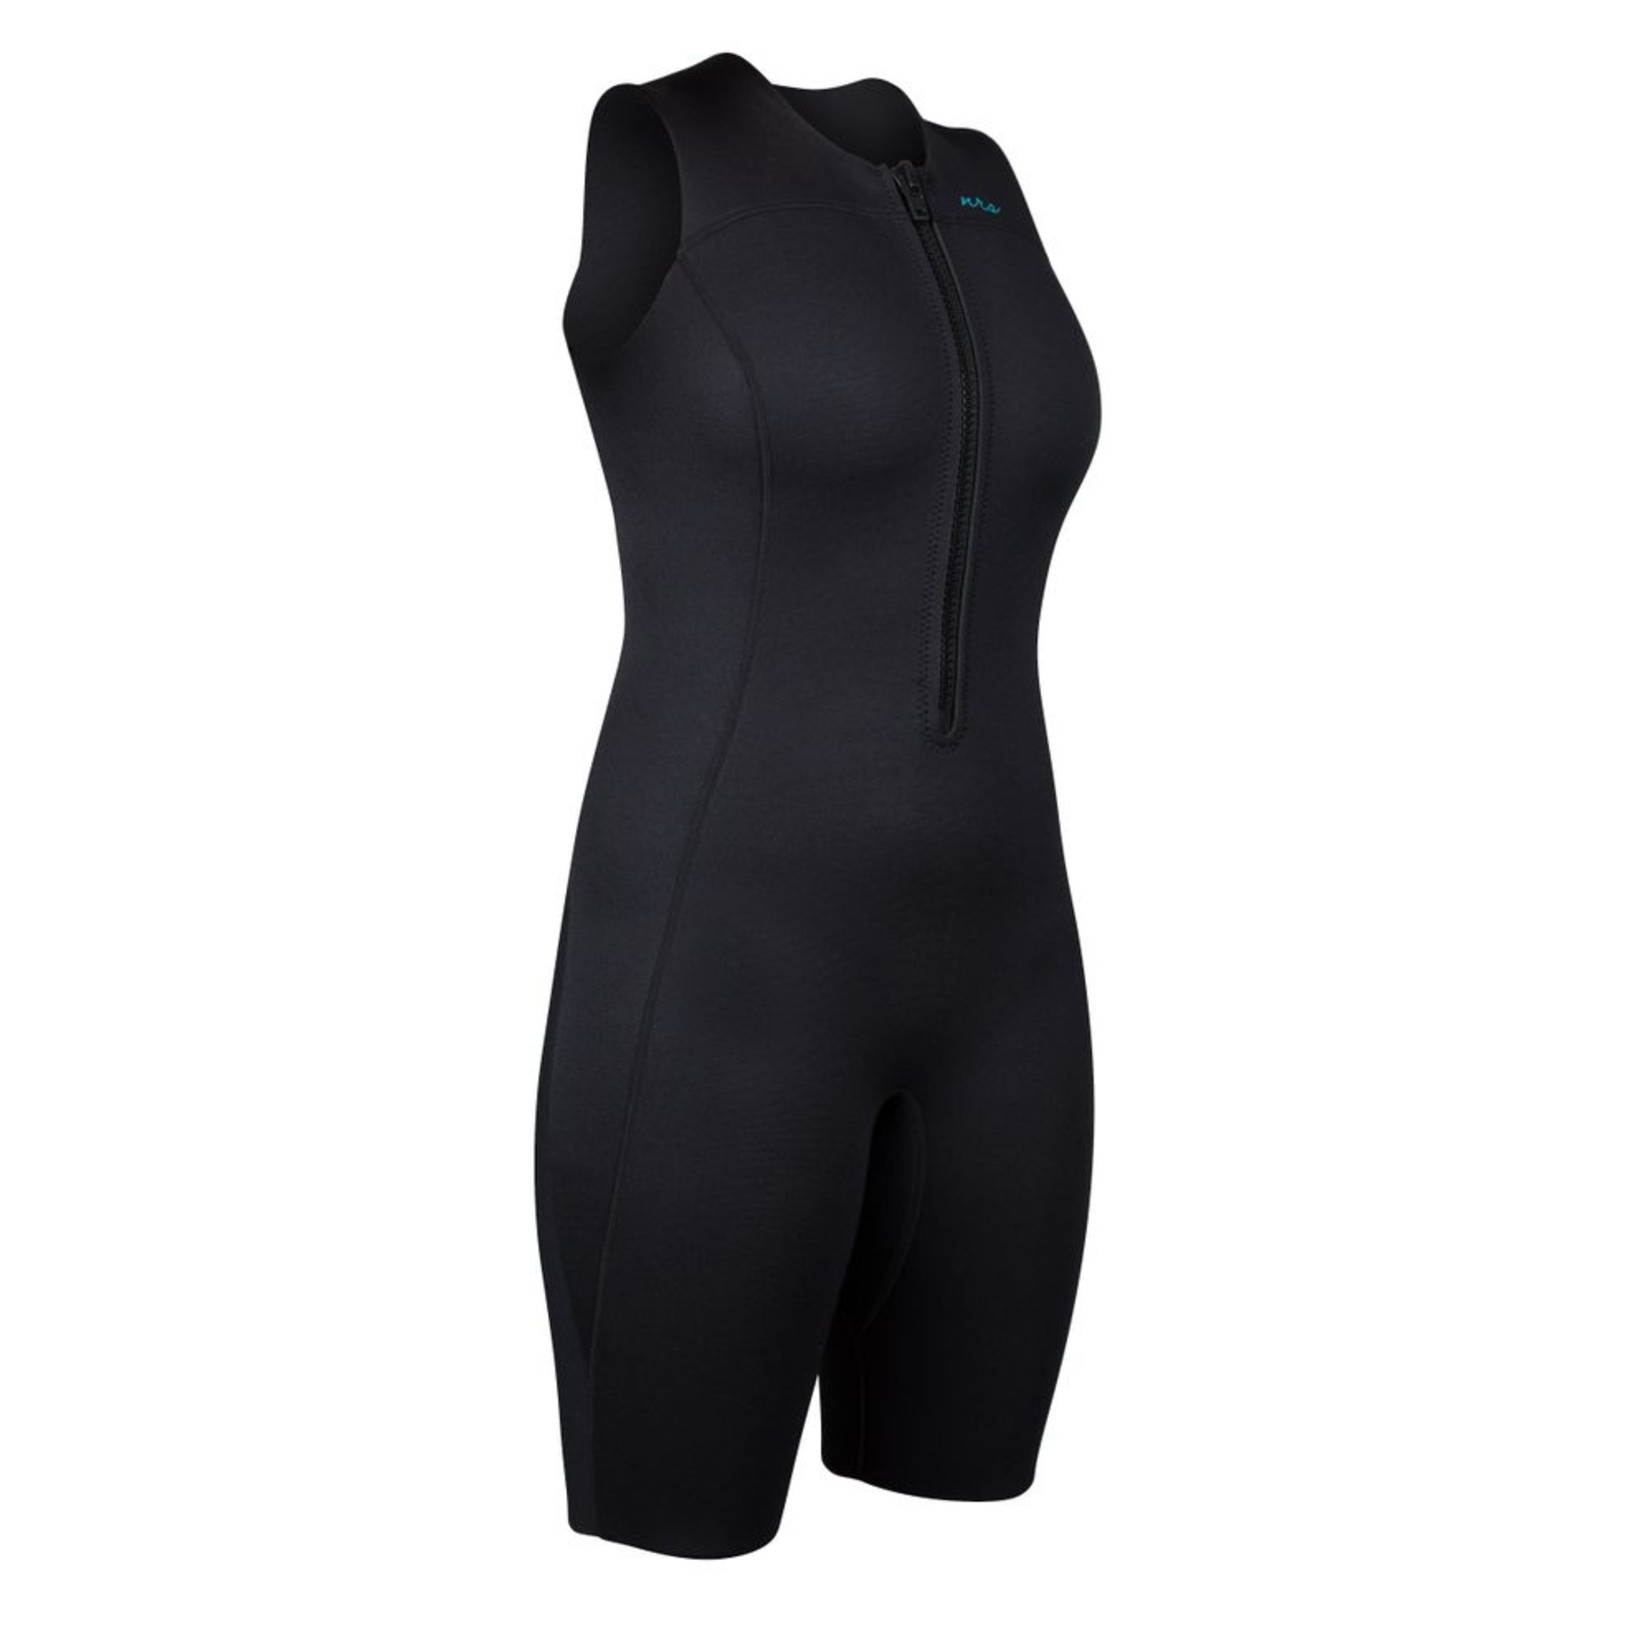 NRS NRS Women's 2.0 Shorty Wetsuit